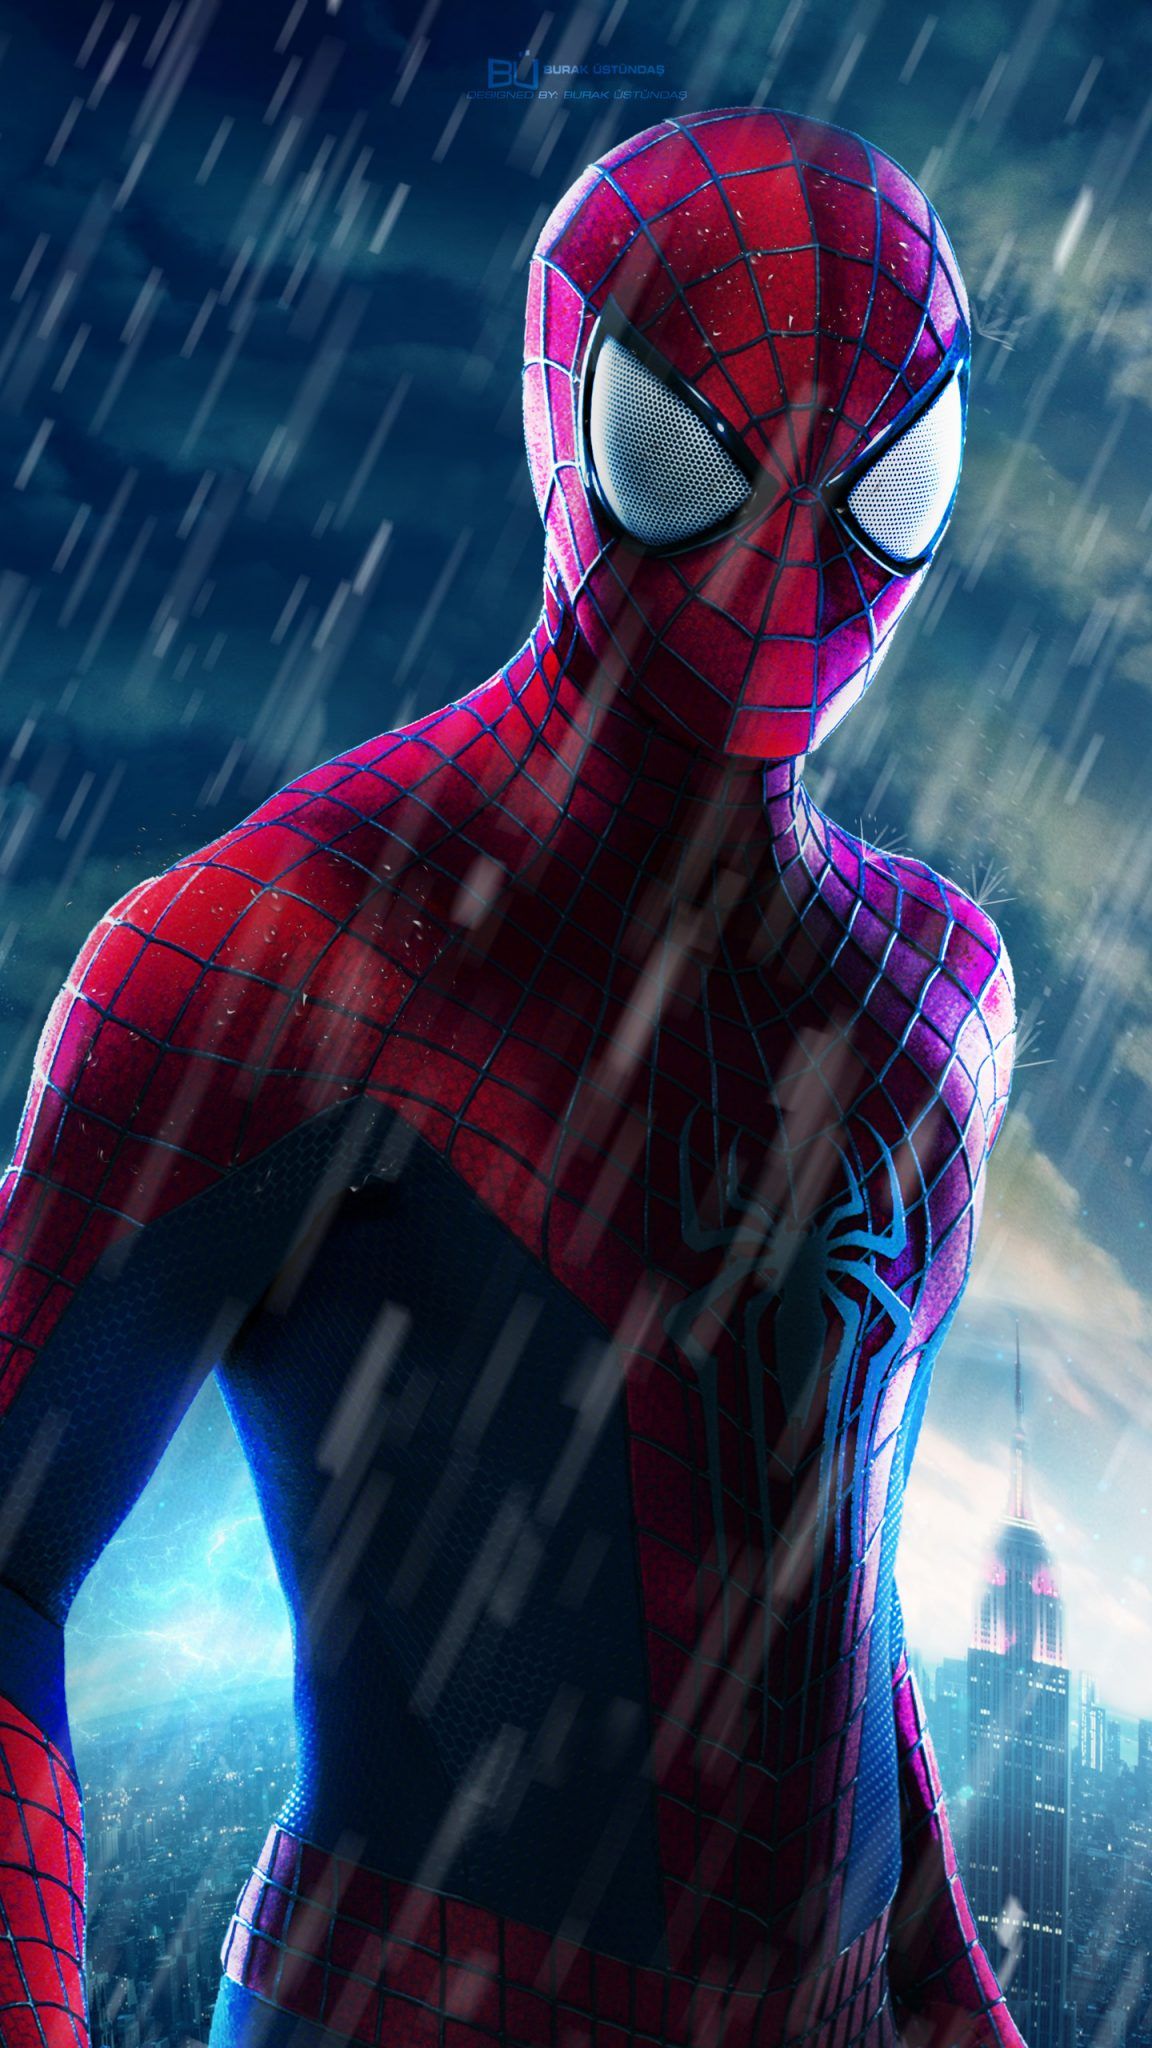 Top Spiderman Wallpaper Homecoming, Into The Spider Verse Freak. Marvel Spiderman Art, Spiderman, Amazing Spiderman